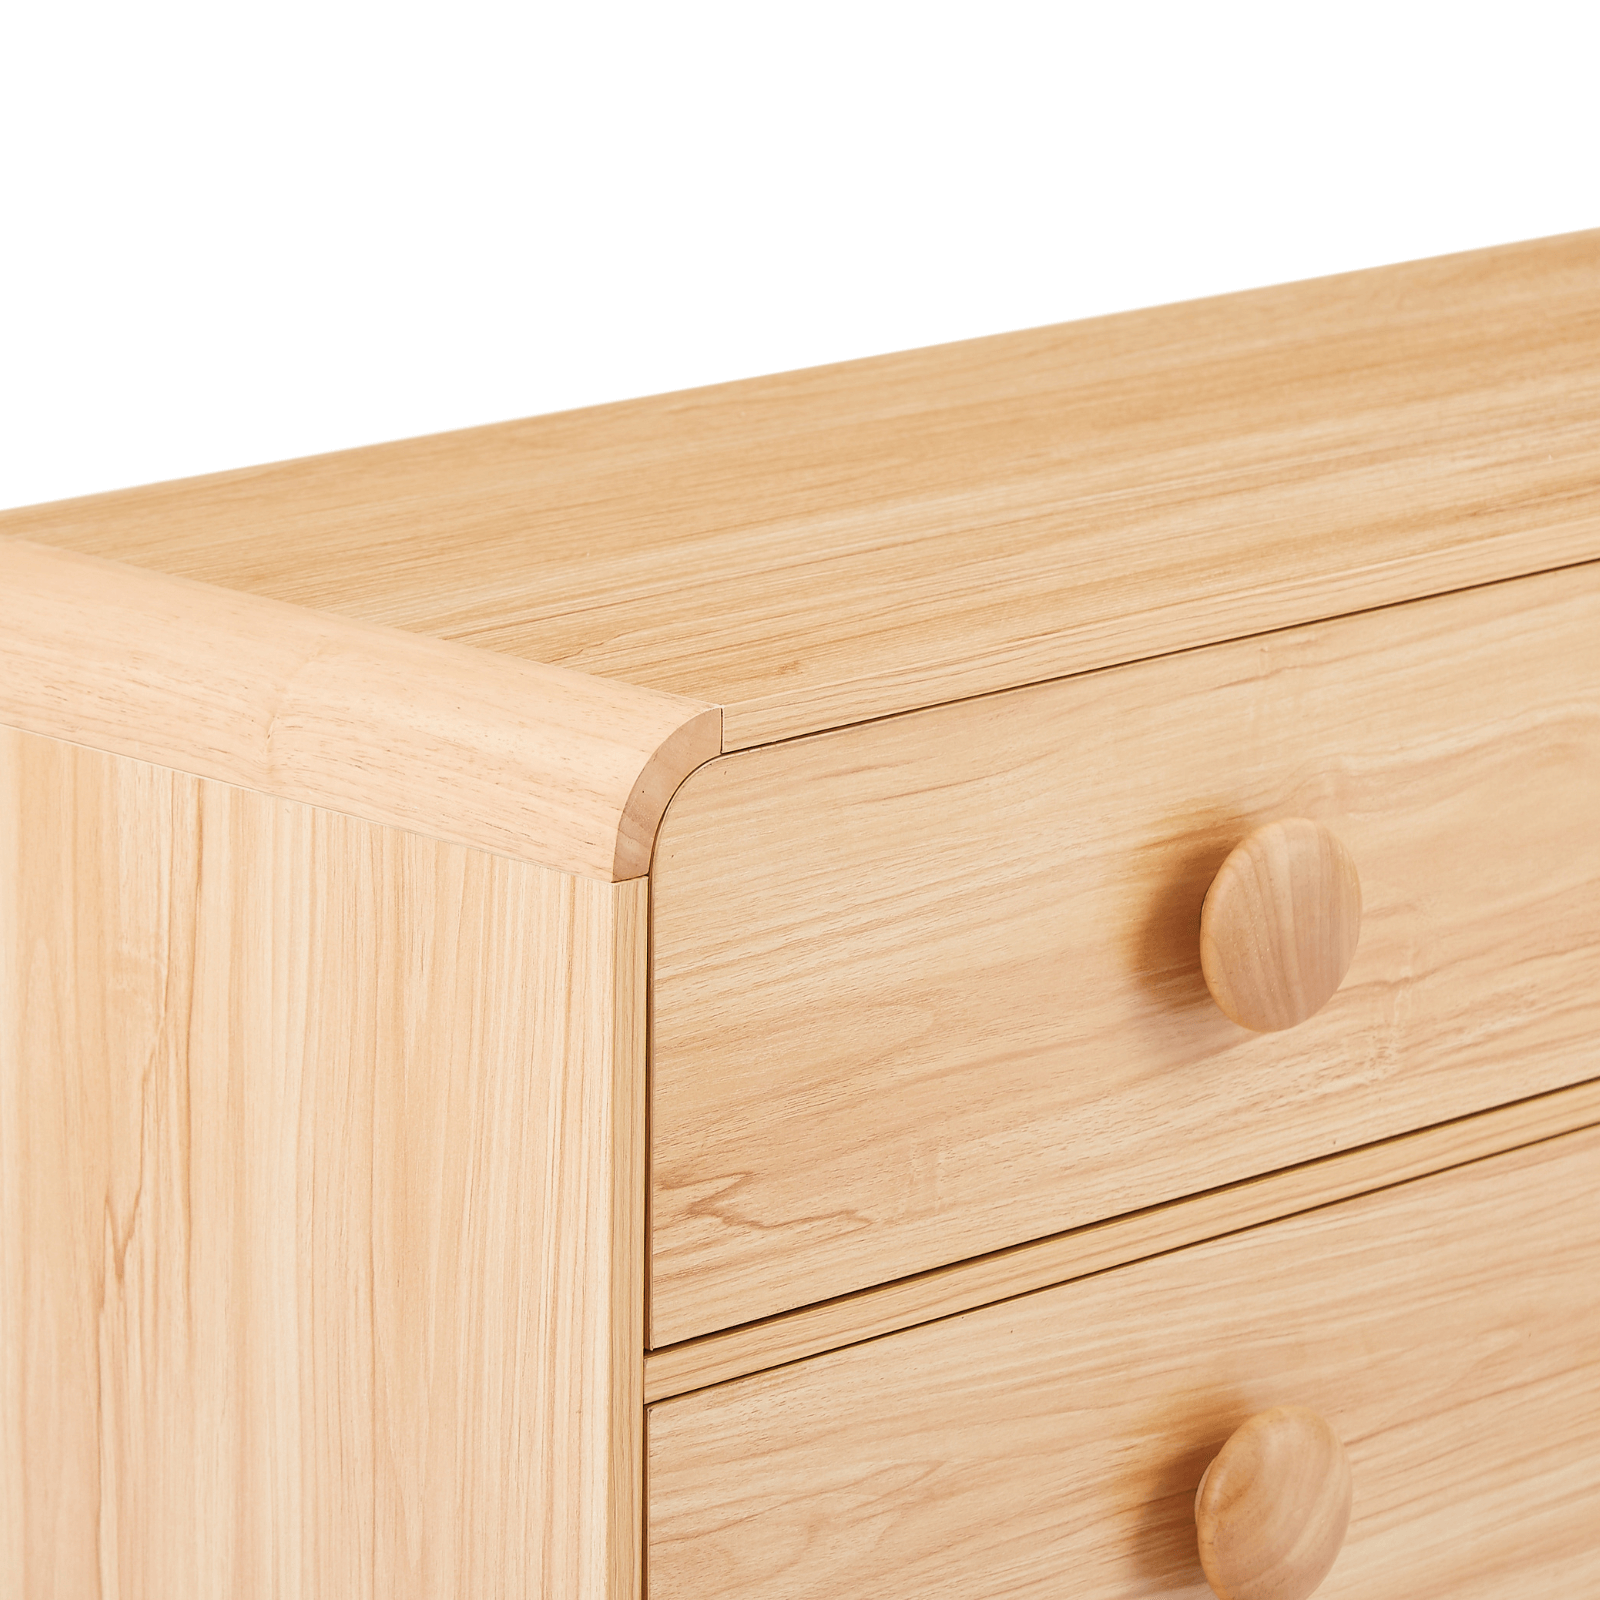 Spencer 6 Chest of Drawers in Natural-Upinteriors